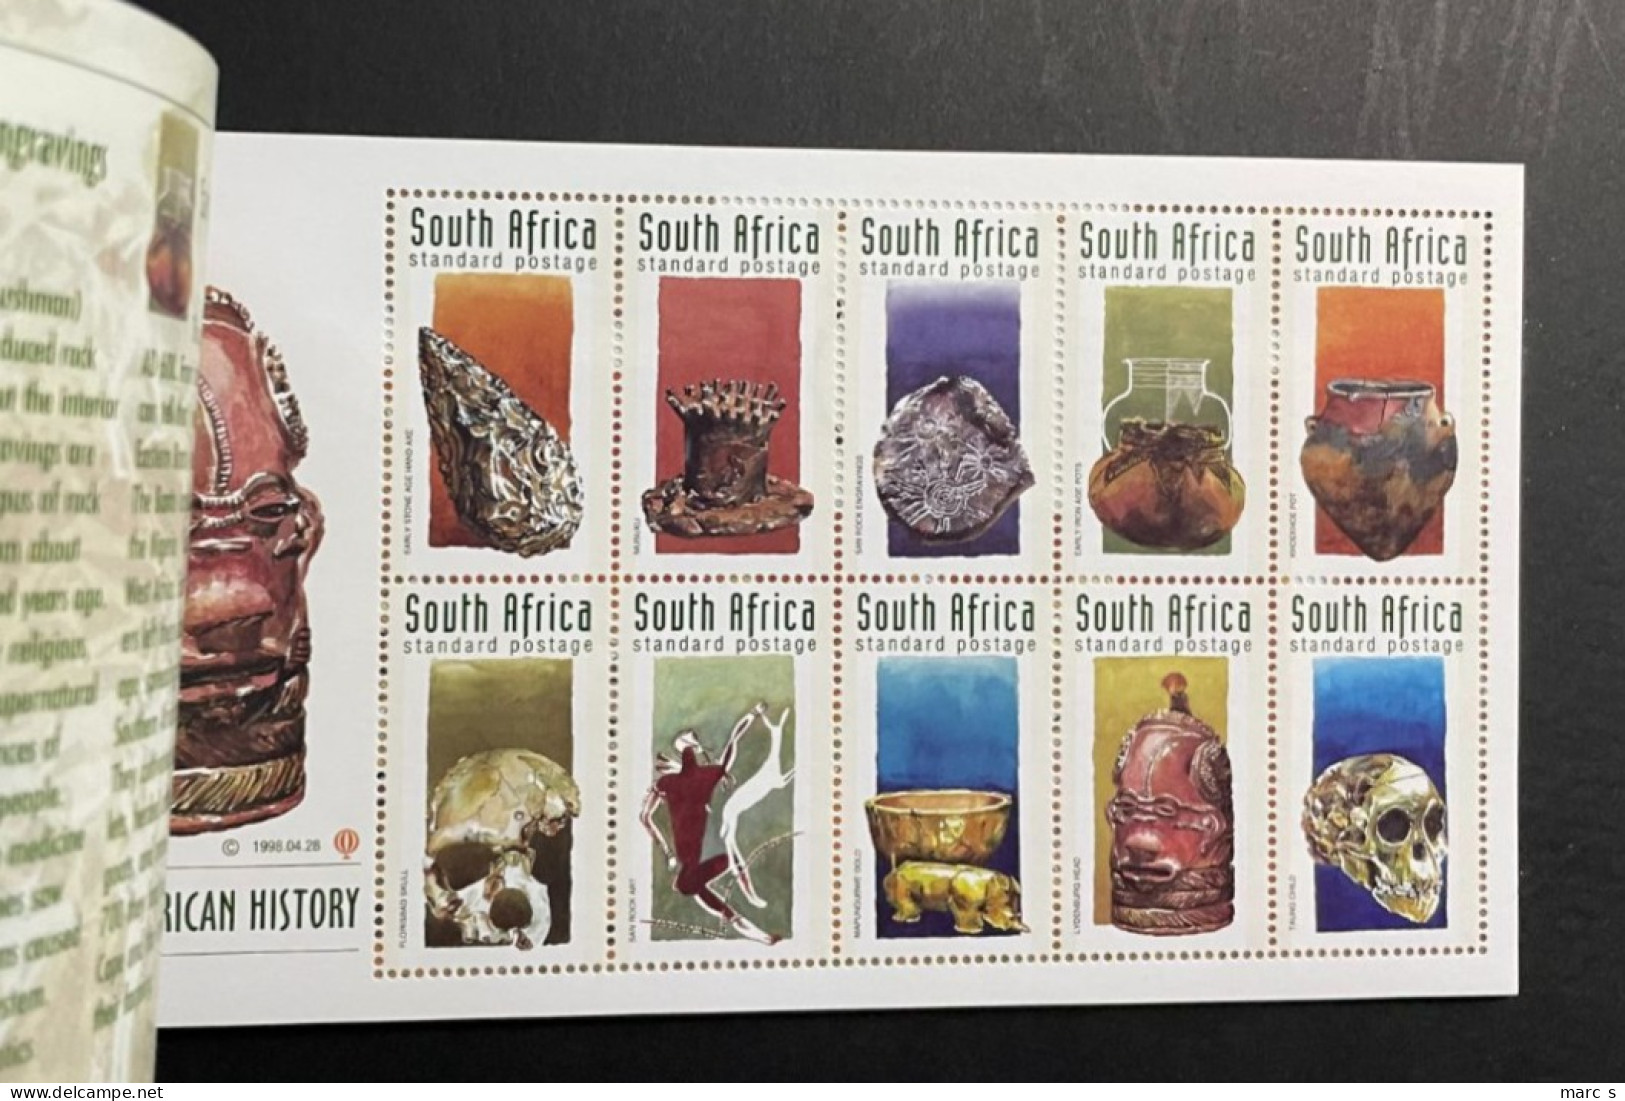 SOUTH AFRICA 1998 - NEUF**/MNH - LUXE - Booklet Carnet Markenheftchen No 3 -  8 Pages - 2 X Mi 1130 / 1139 - Libretti